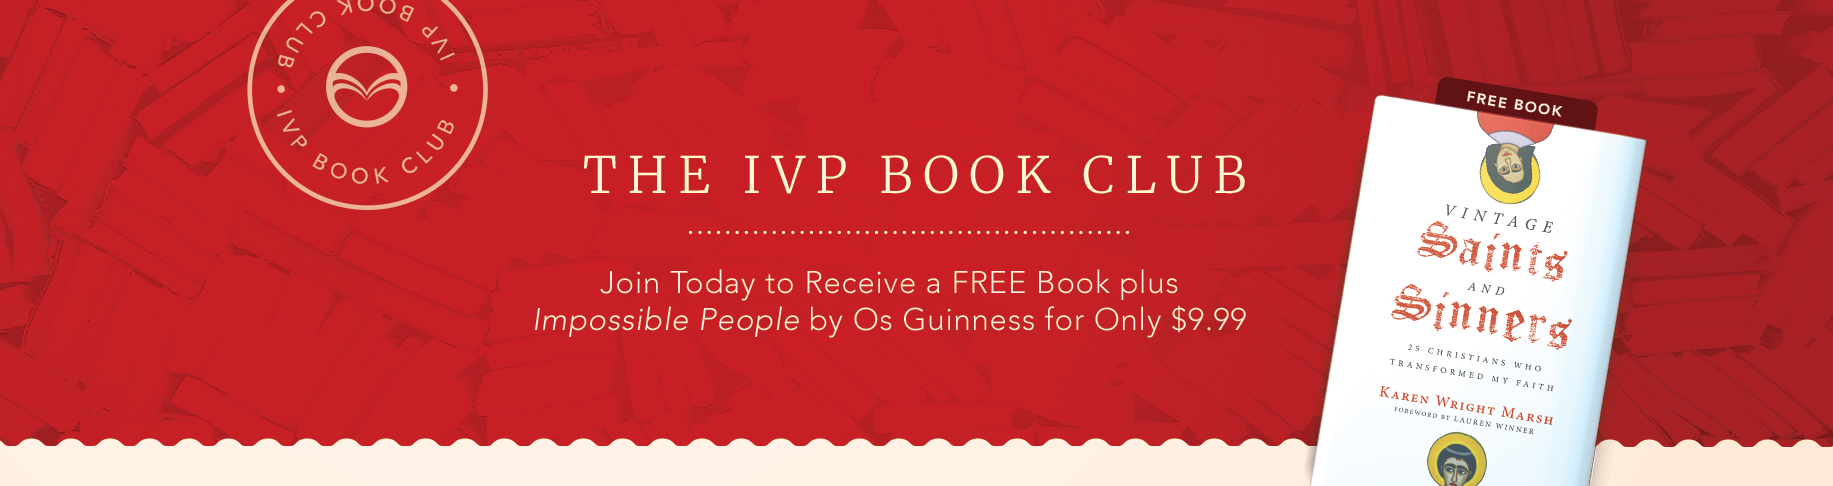 IVP Book Club - Join Today to Receive a Free Book Plus "Impossible People" by Os Guinness for Only $9.99